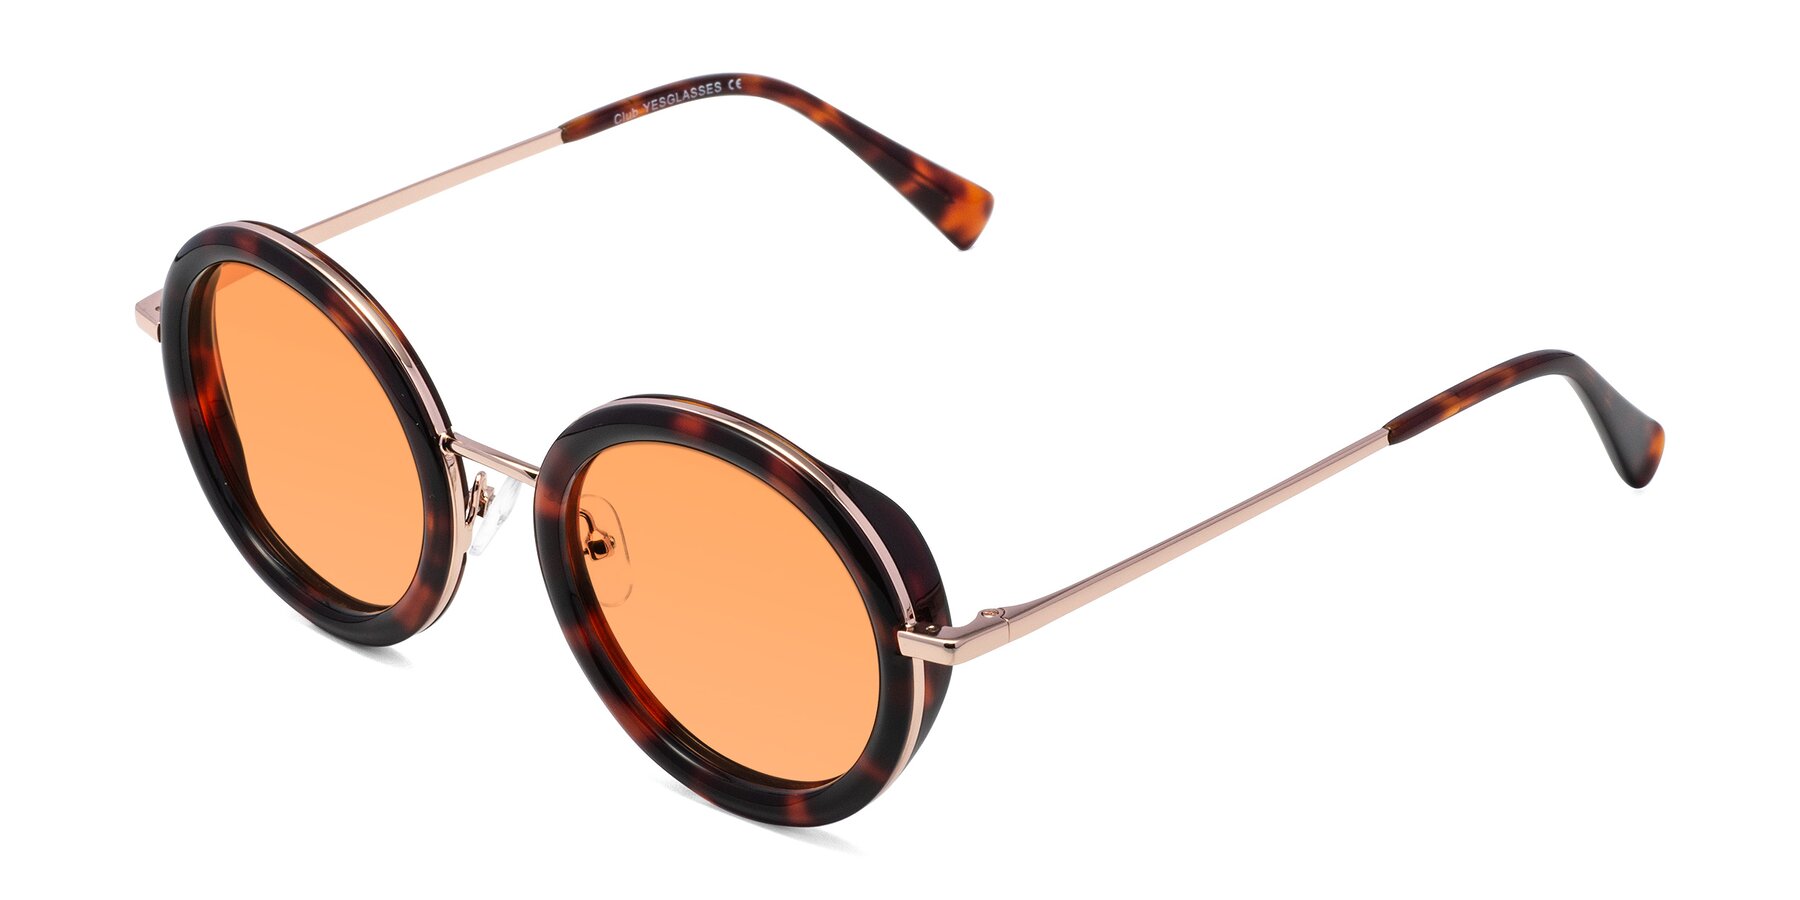 Angle of Club in Tortoise-Rose Gold with Medium Orange Tinted Lenses